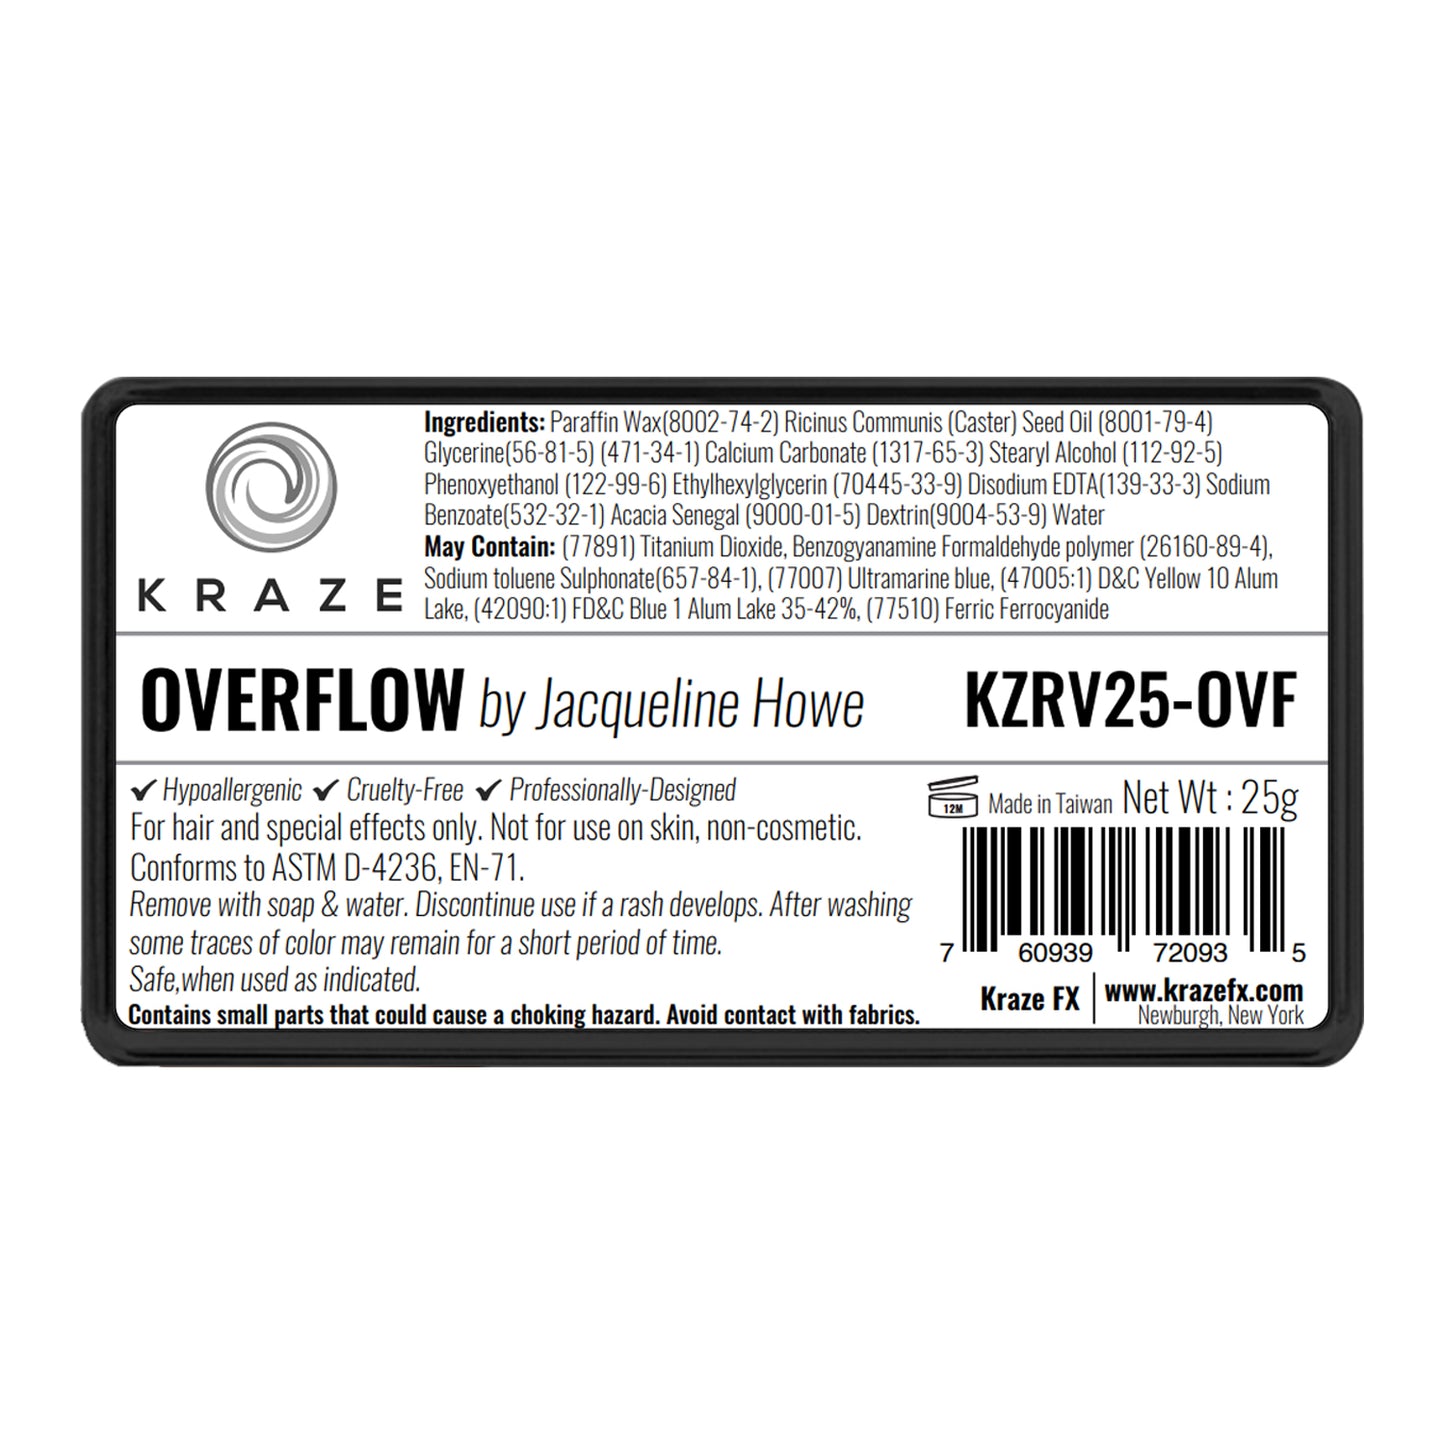 Kraze FX Dome Stroke - Jacqueline Howe Bold and Brilliant Collection - Overflow (25 gm)